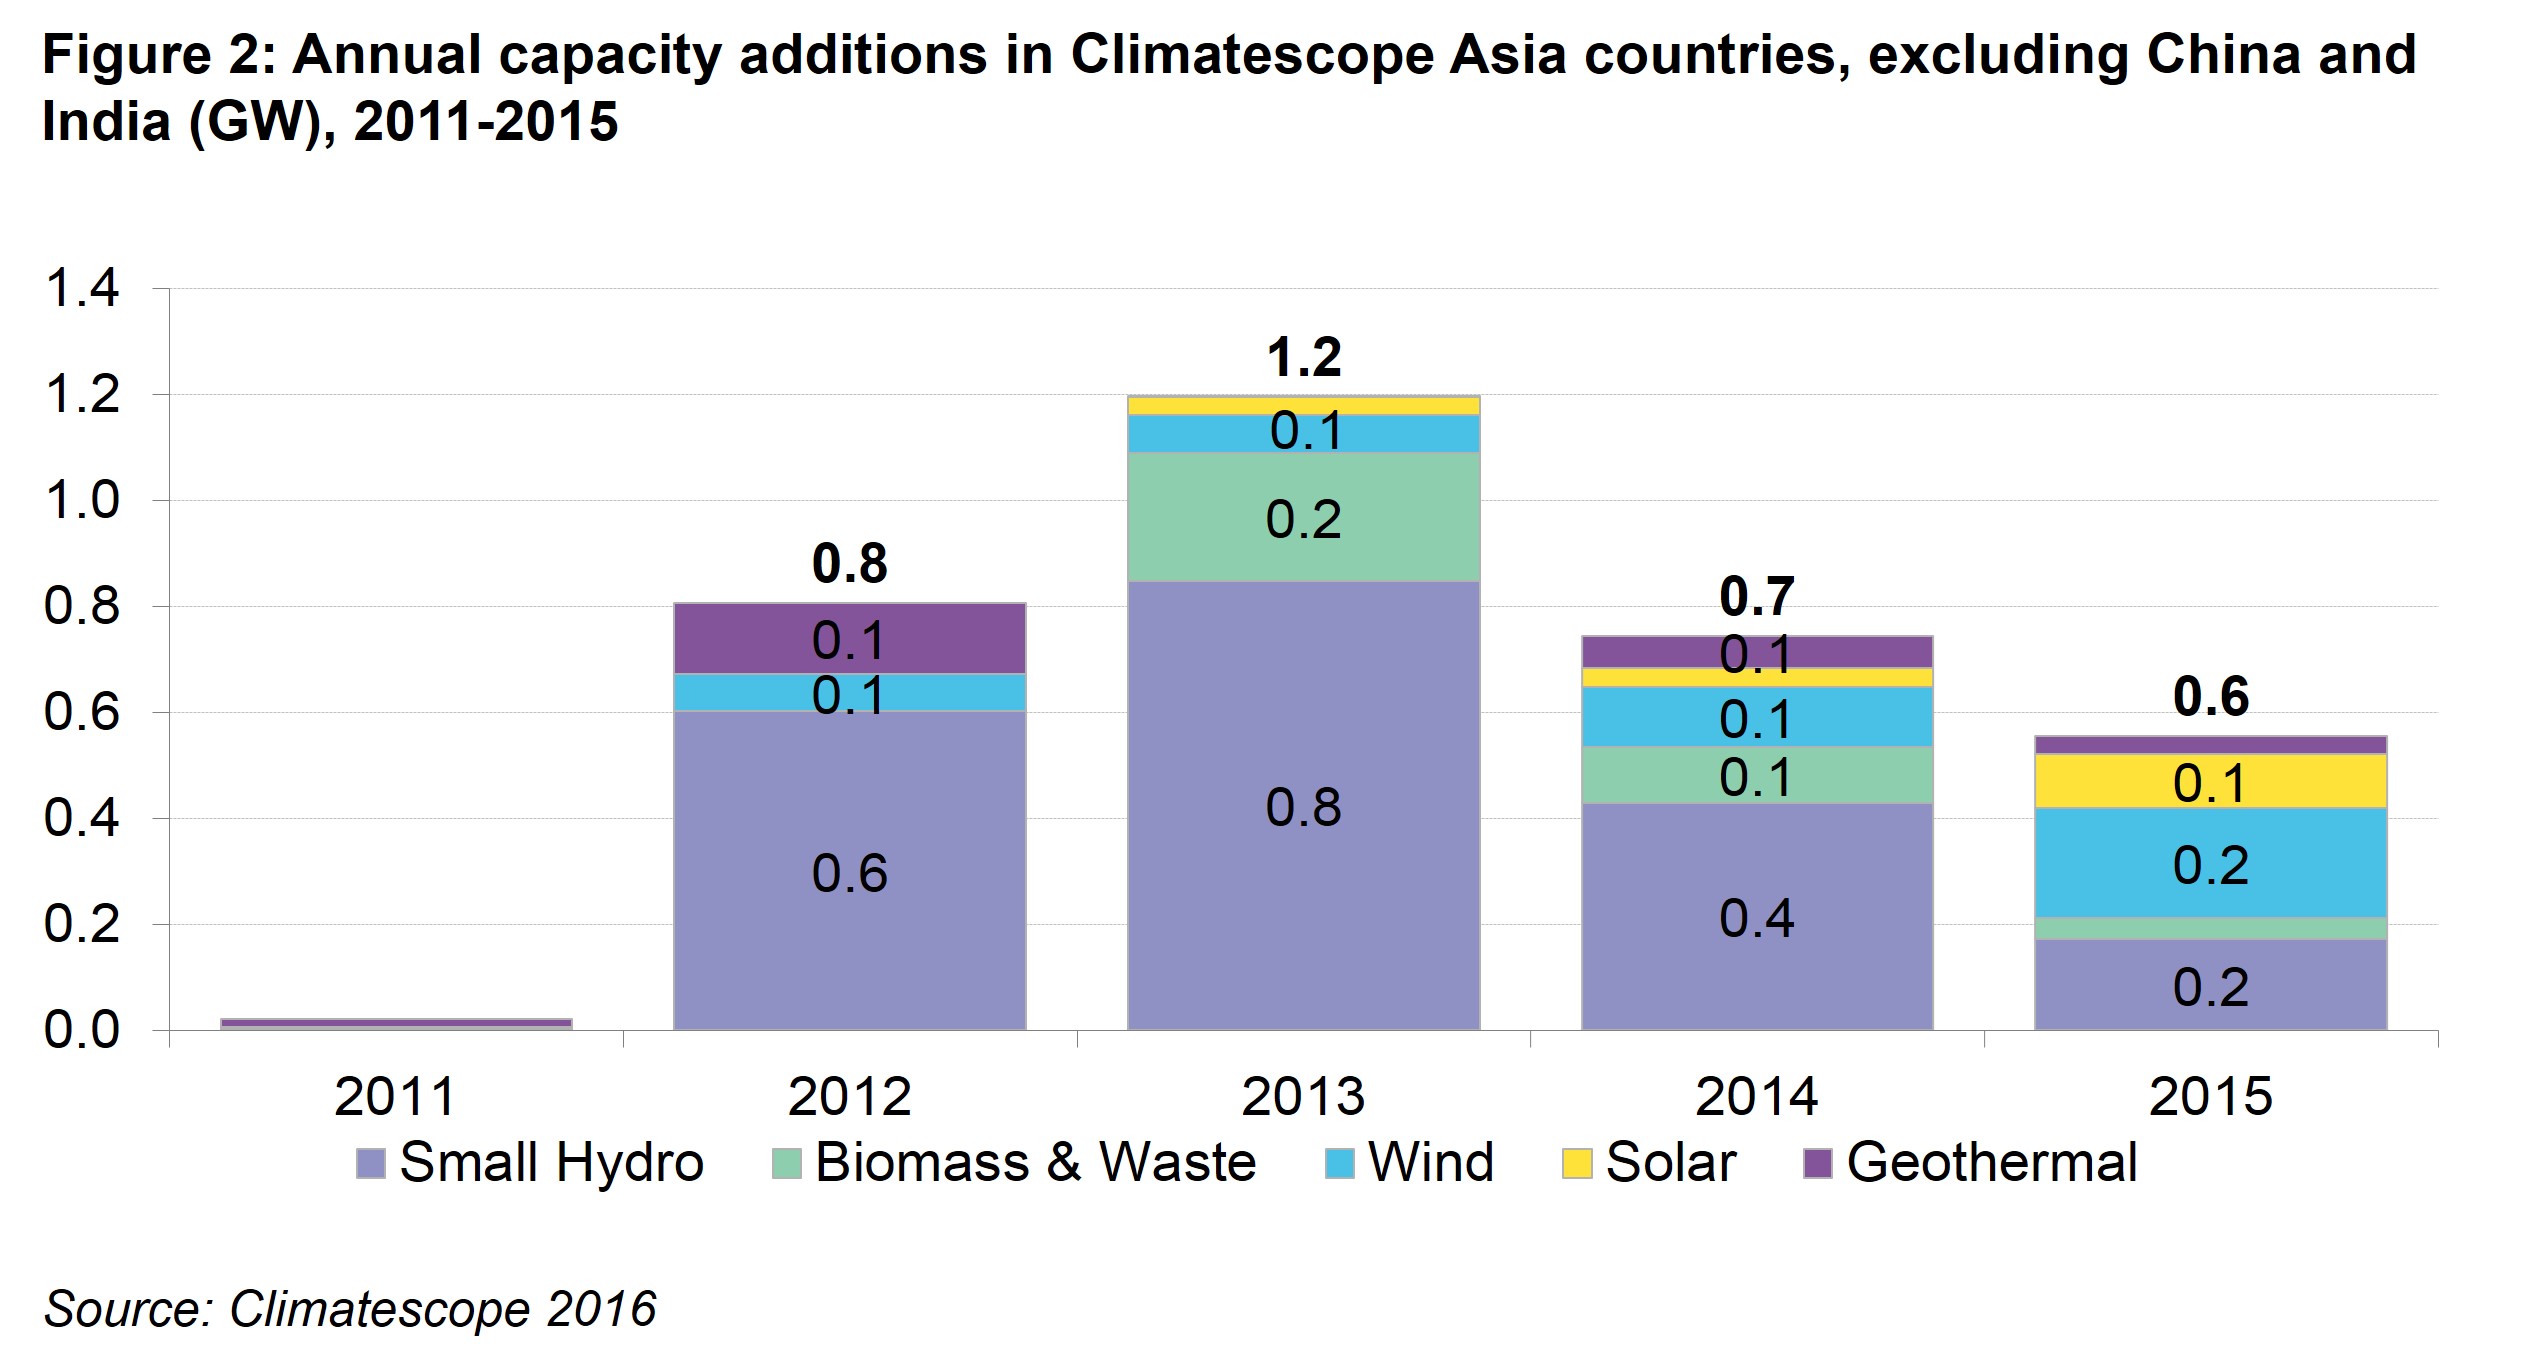 Asia Fig 2 - Annual capacity additions in Climatescope Asia nations, excluding China and India (GW), 2011-2015